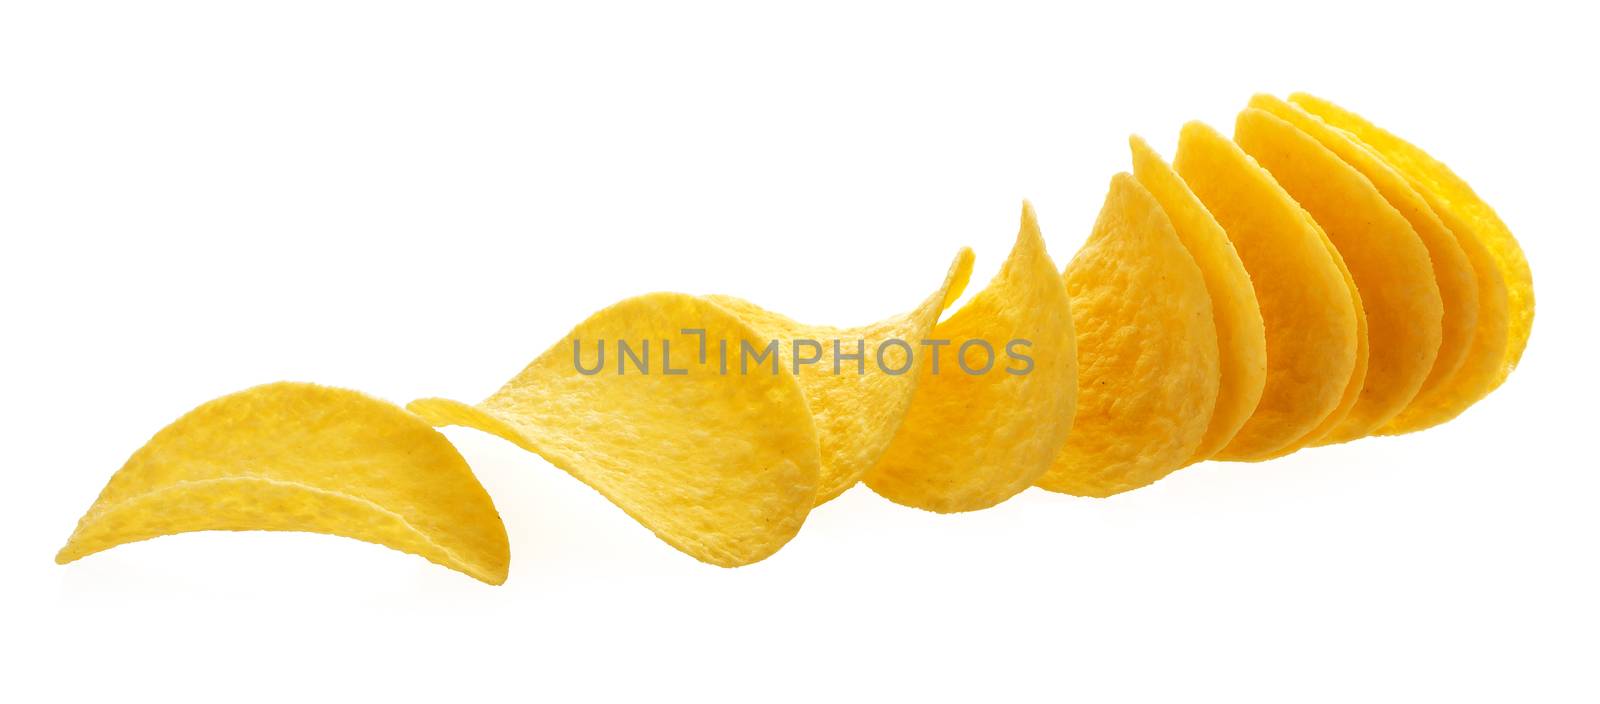 Potato chips isolated on white background with clipping path by xamtiw